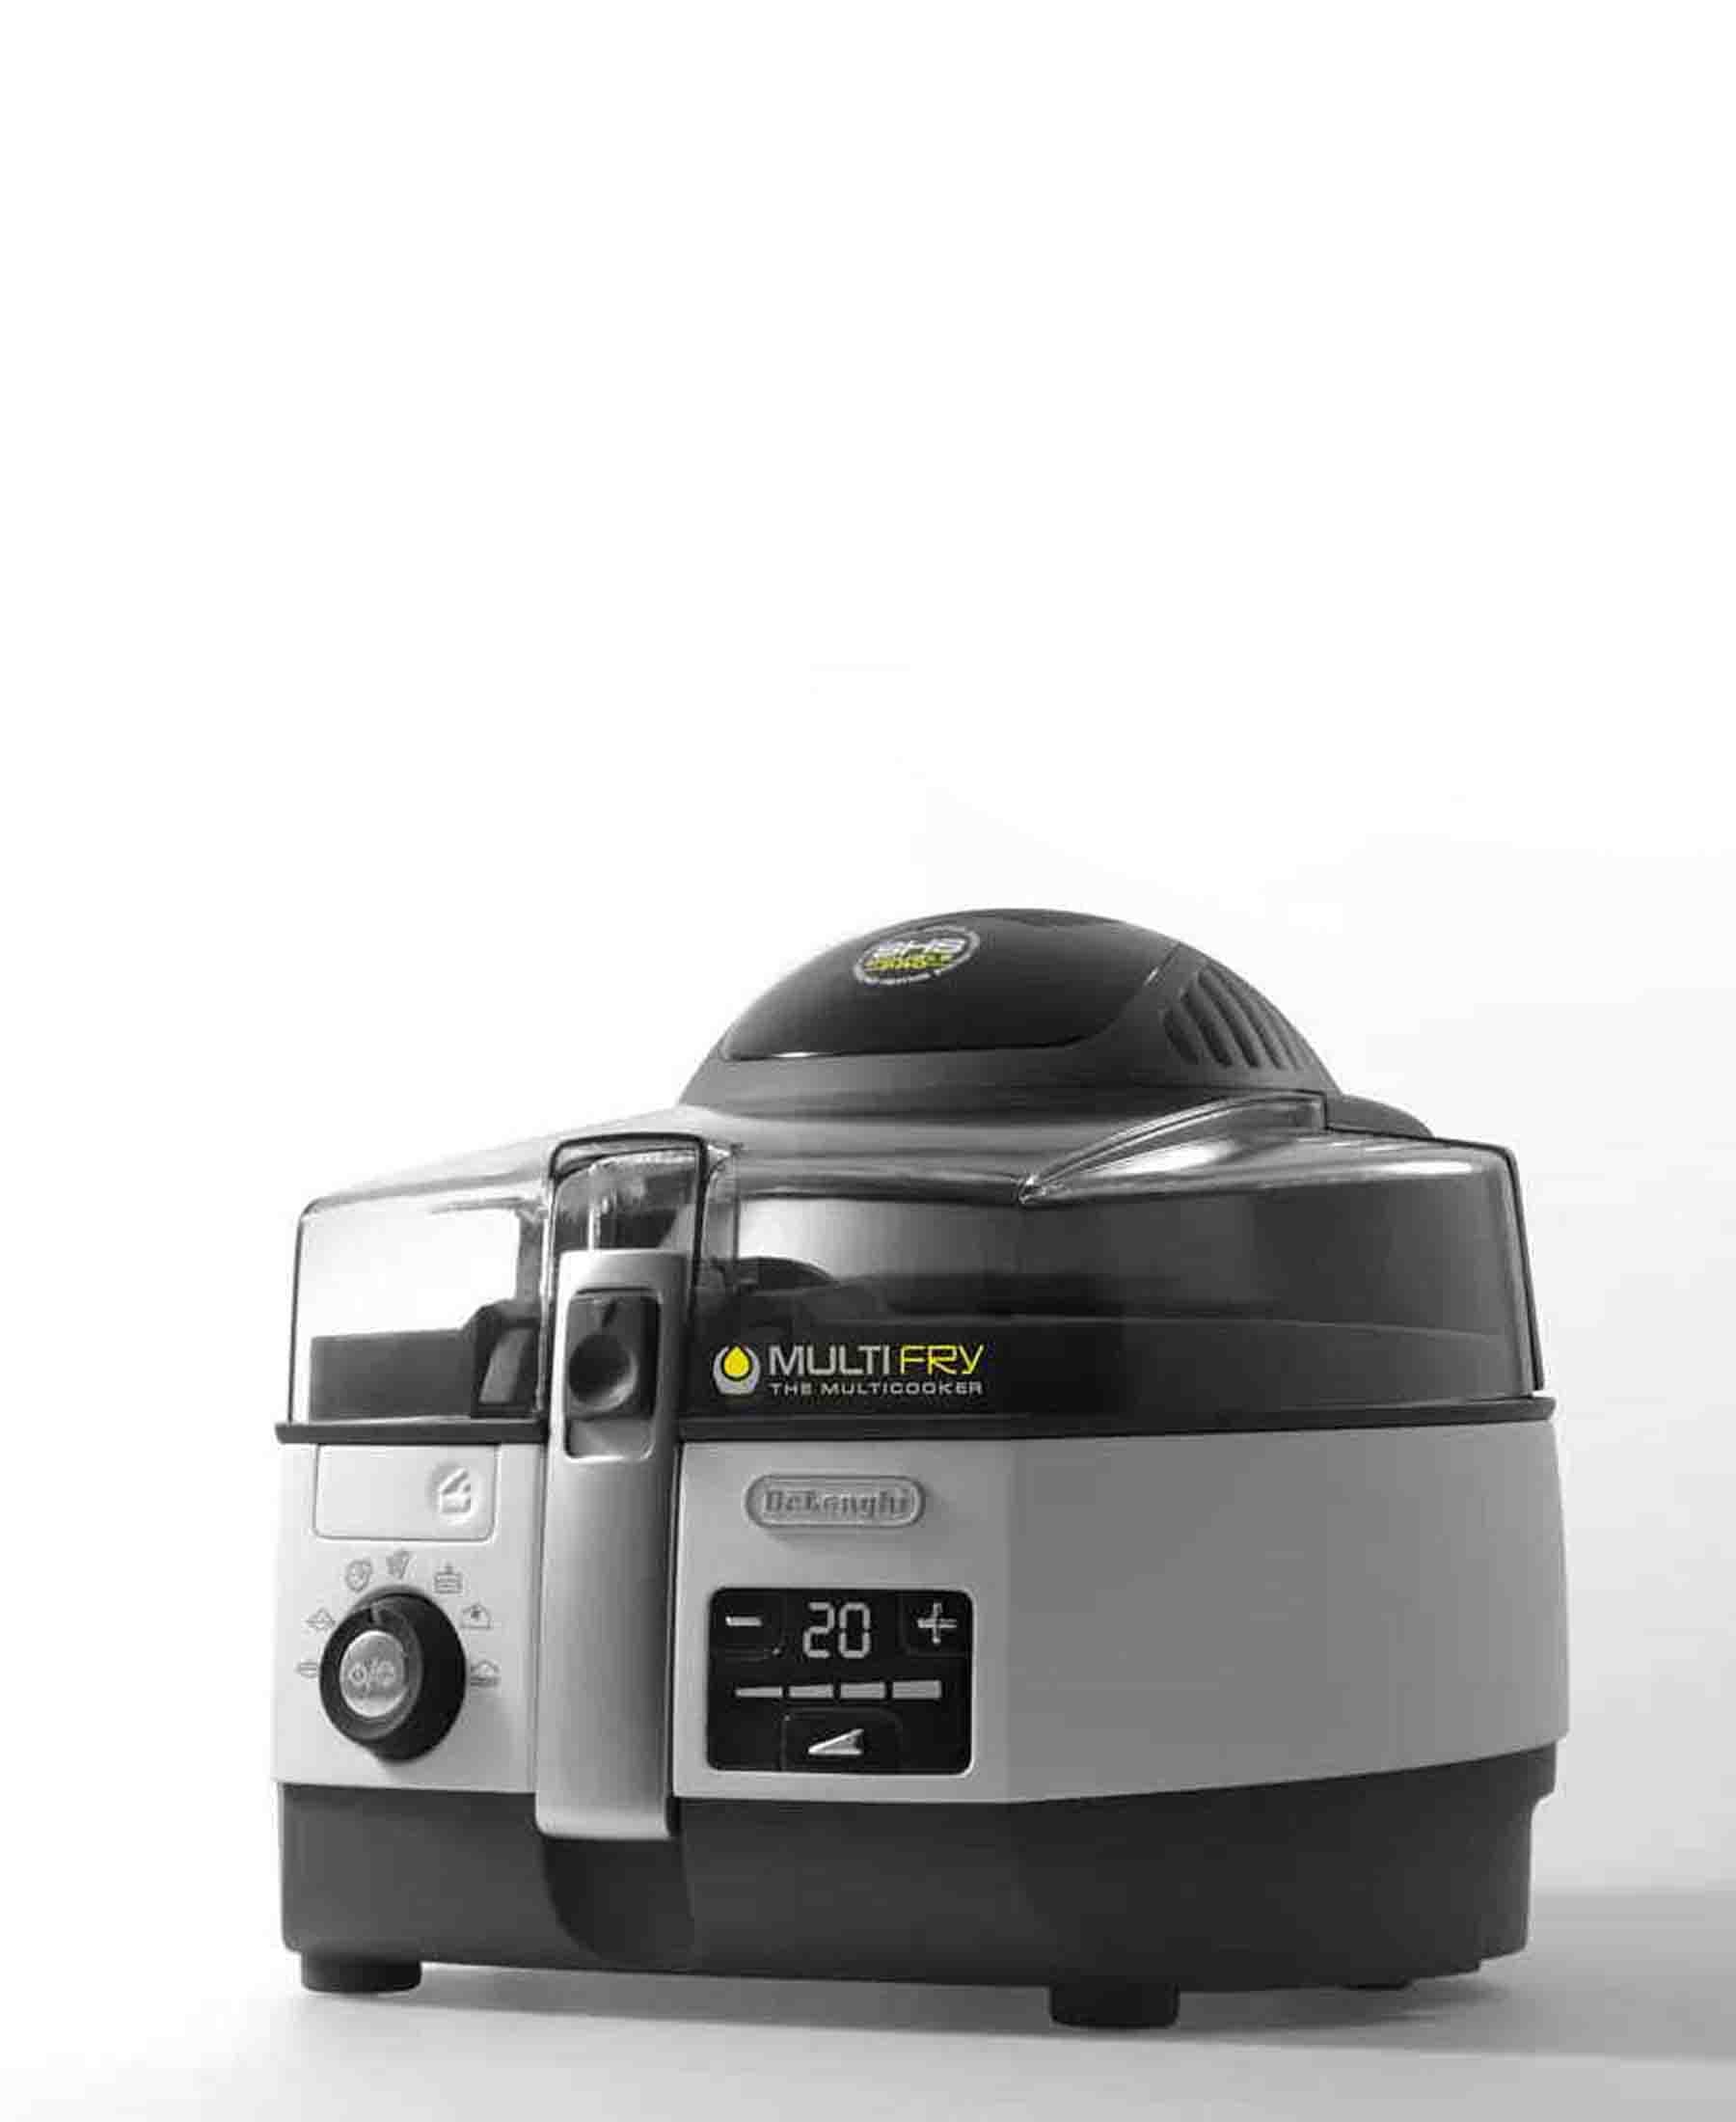 DeLonghi Multifry Extra Chef Review